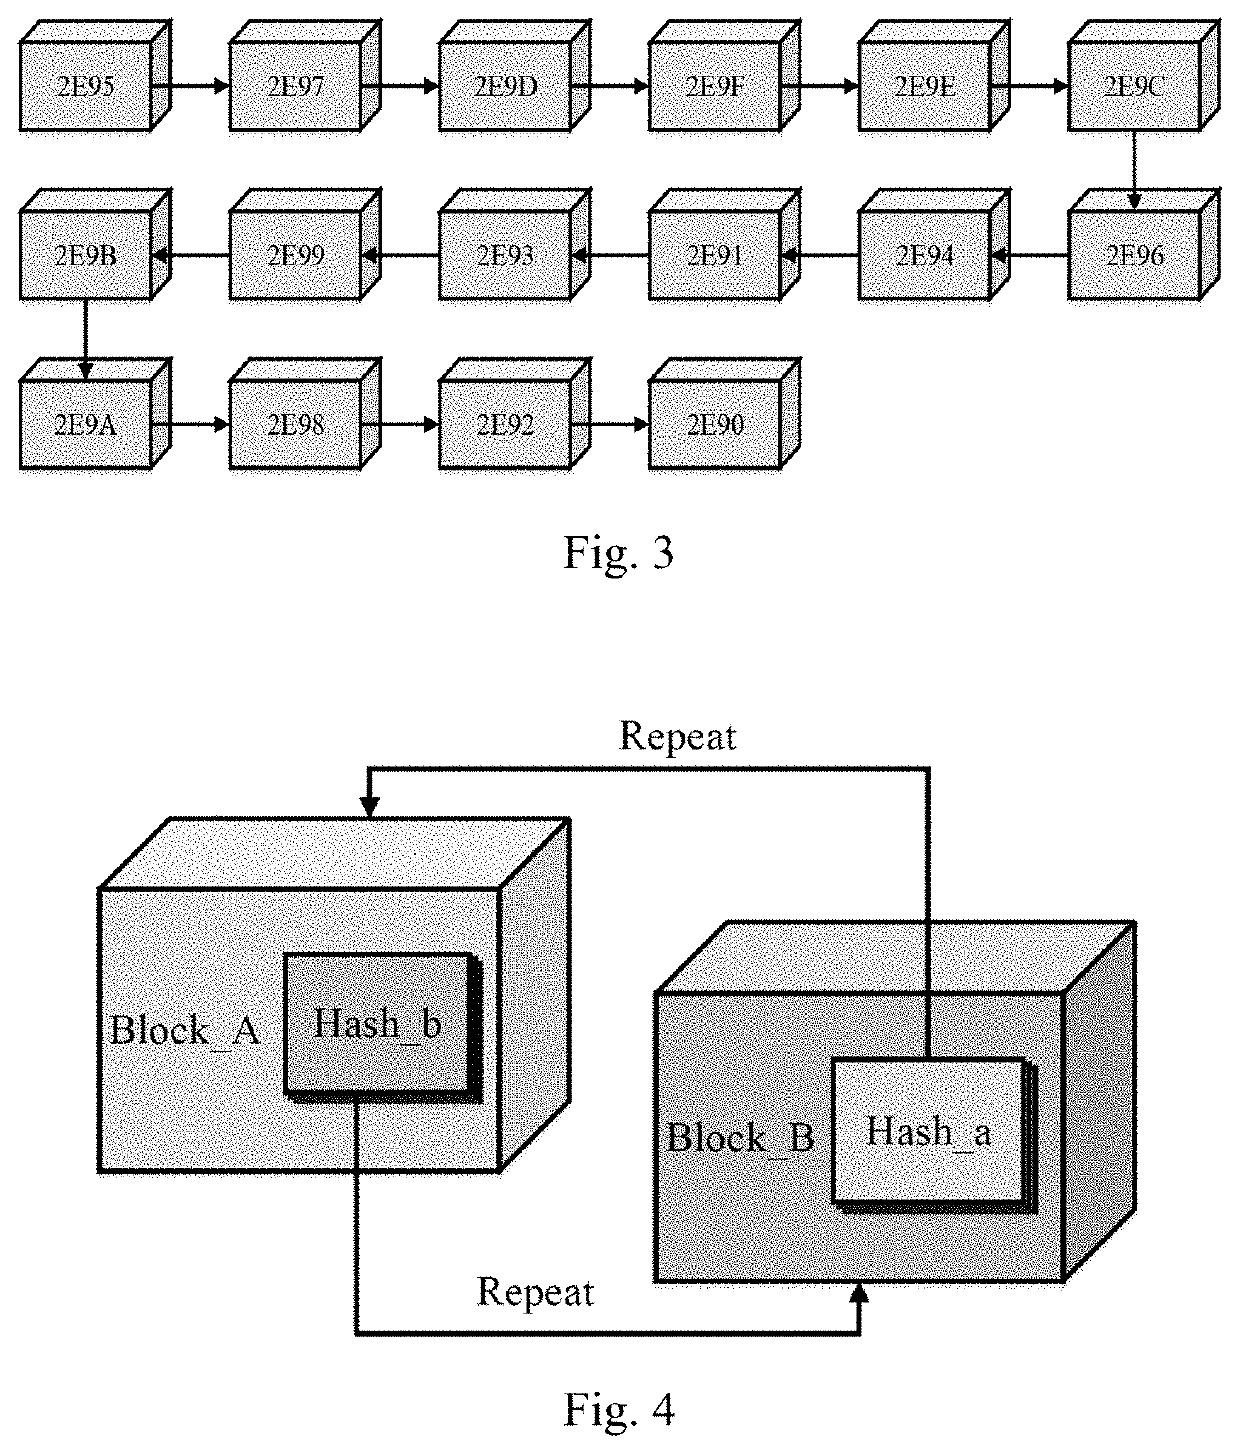 BlockNet security organization storage mapping method for spatial data